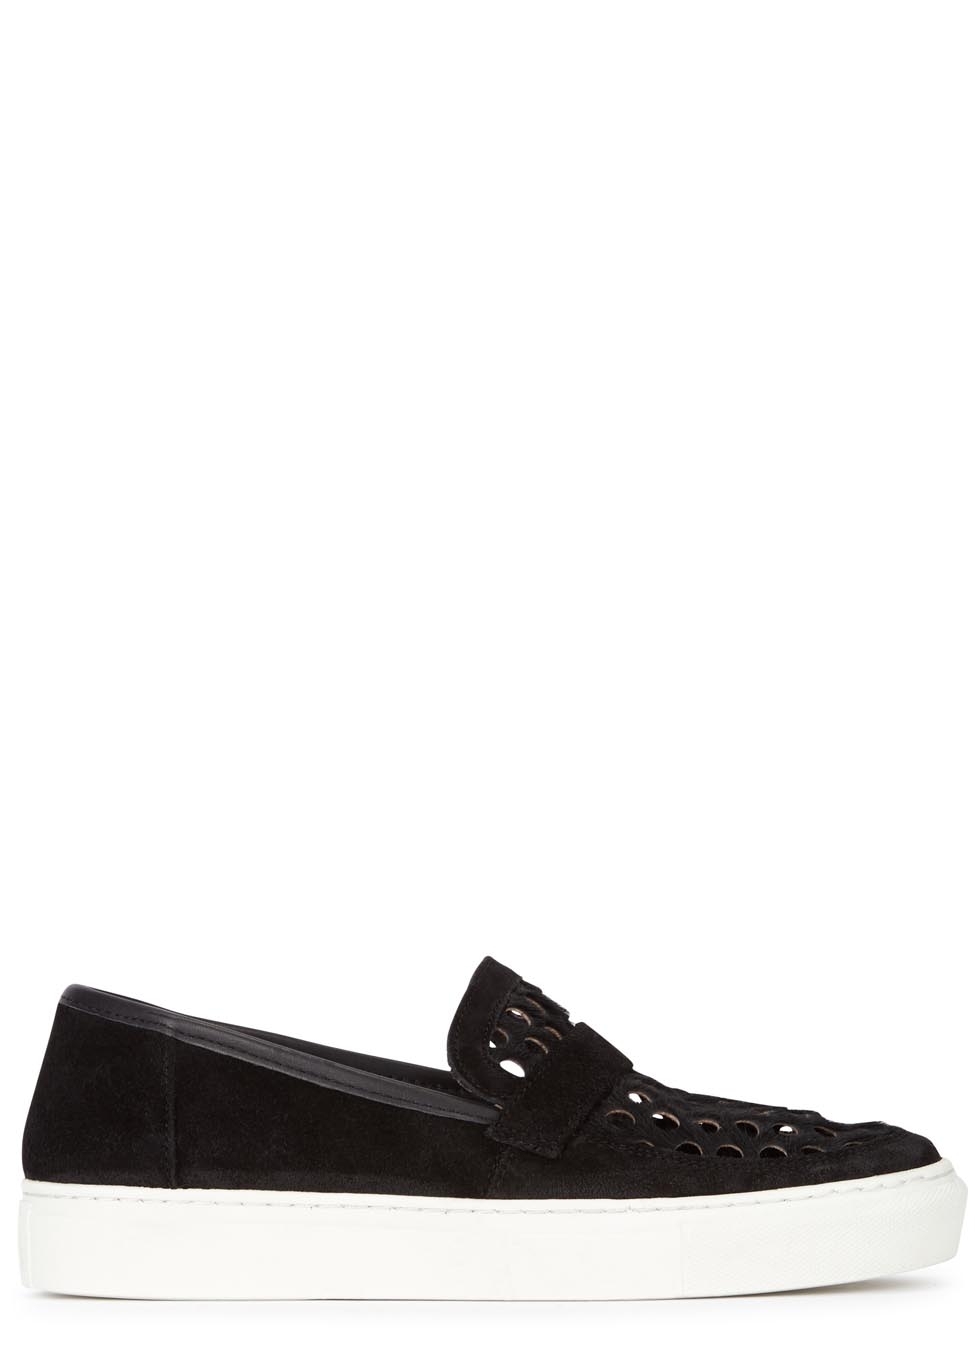 Stacy black suede and calf hair skate shoes